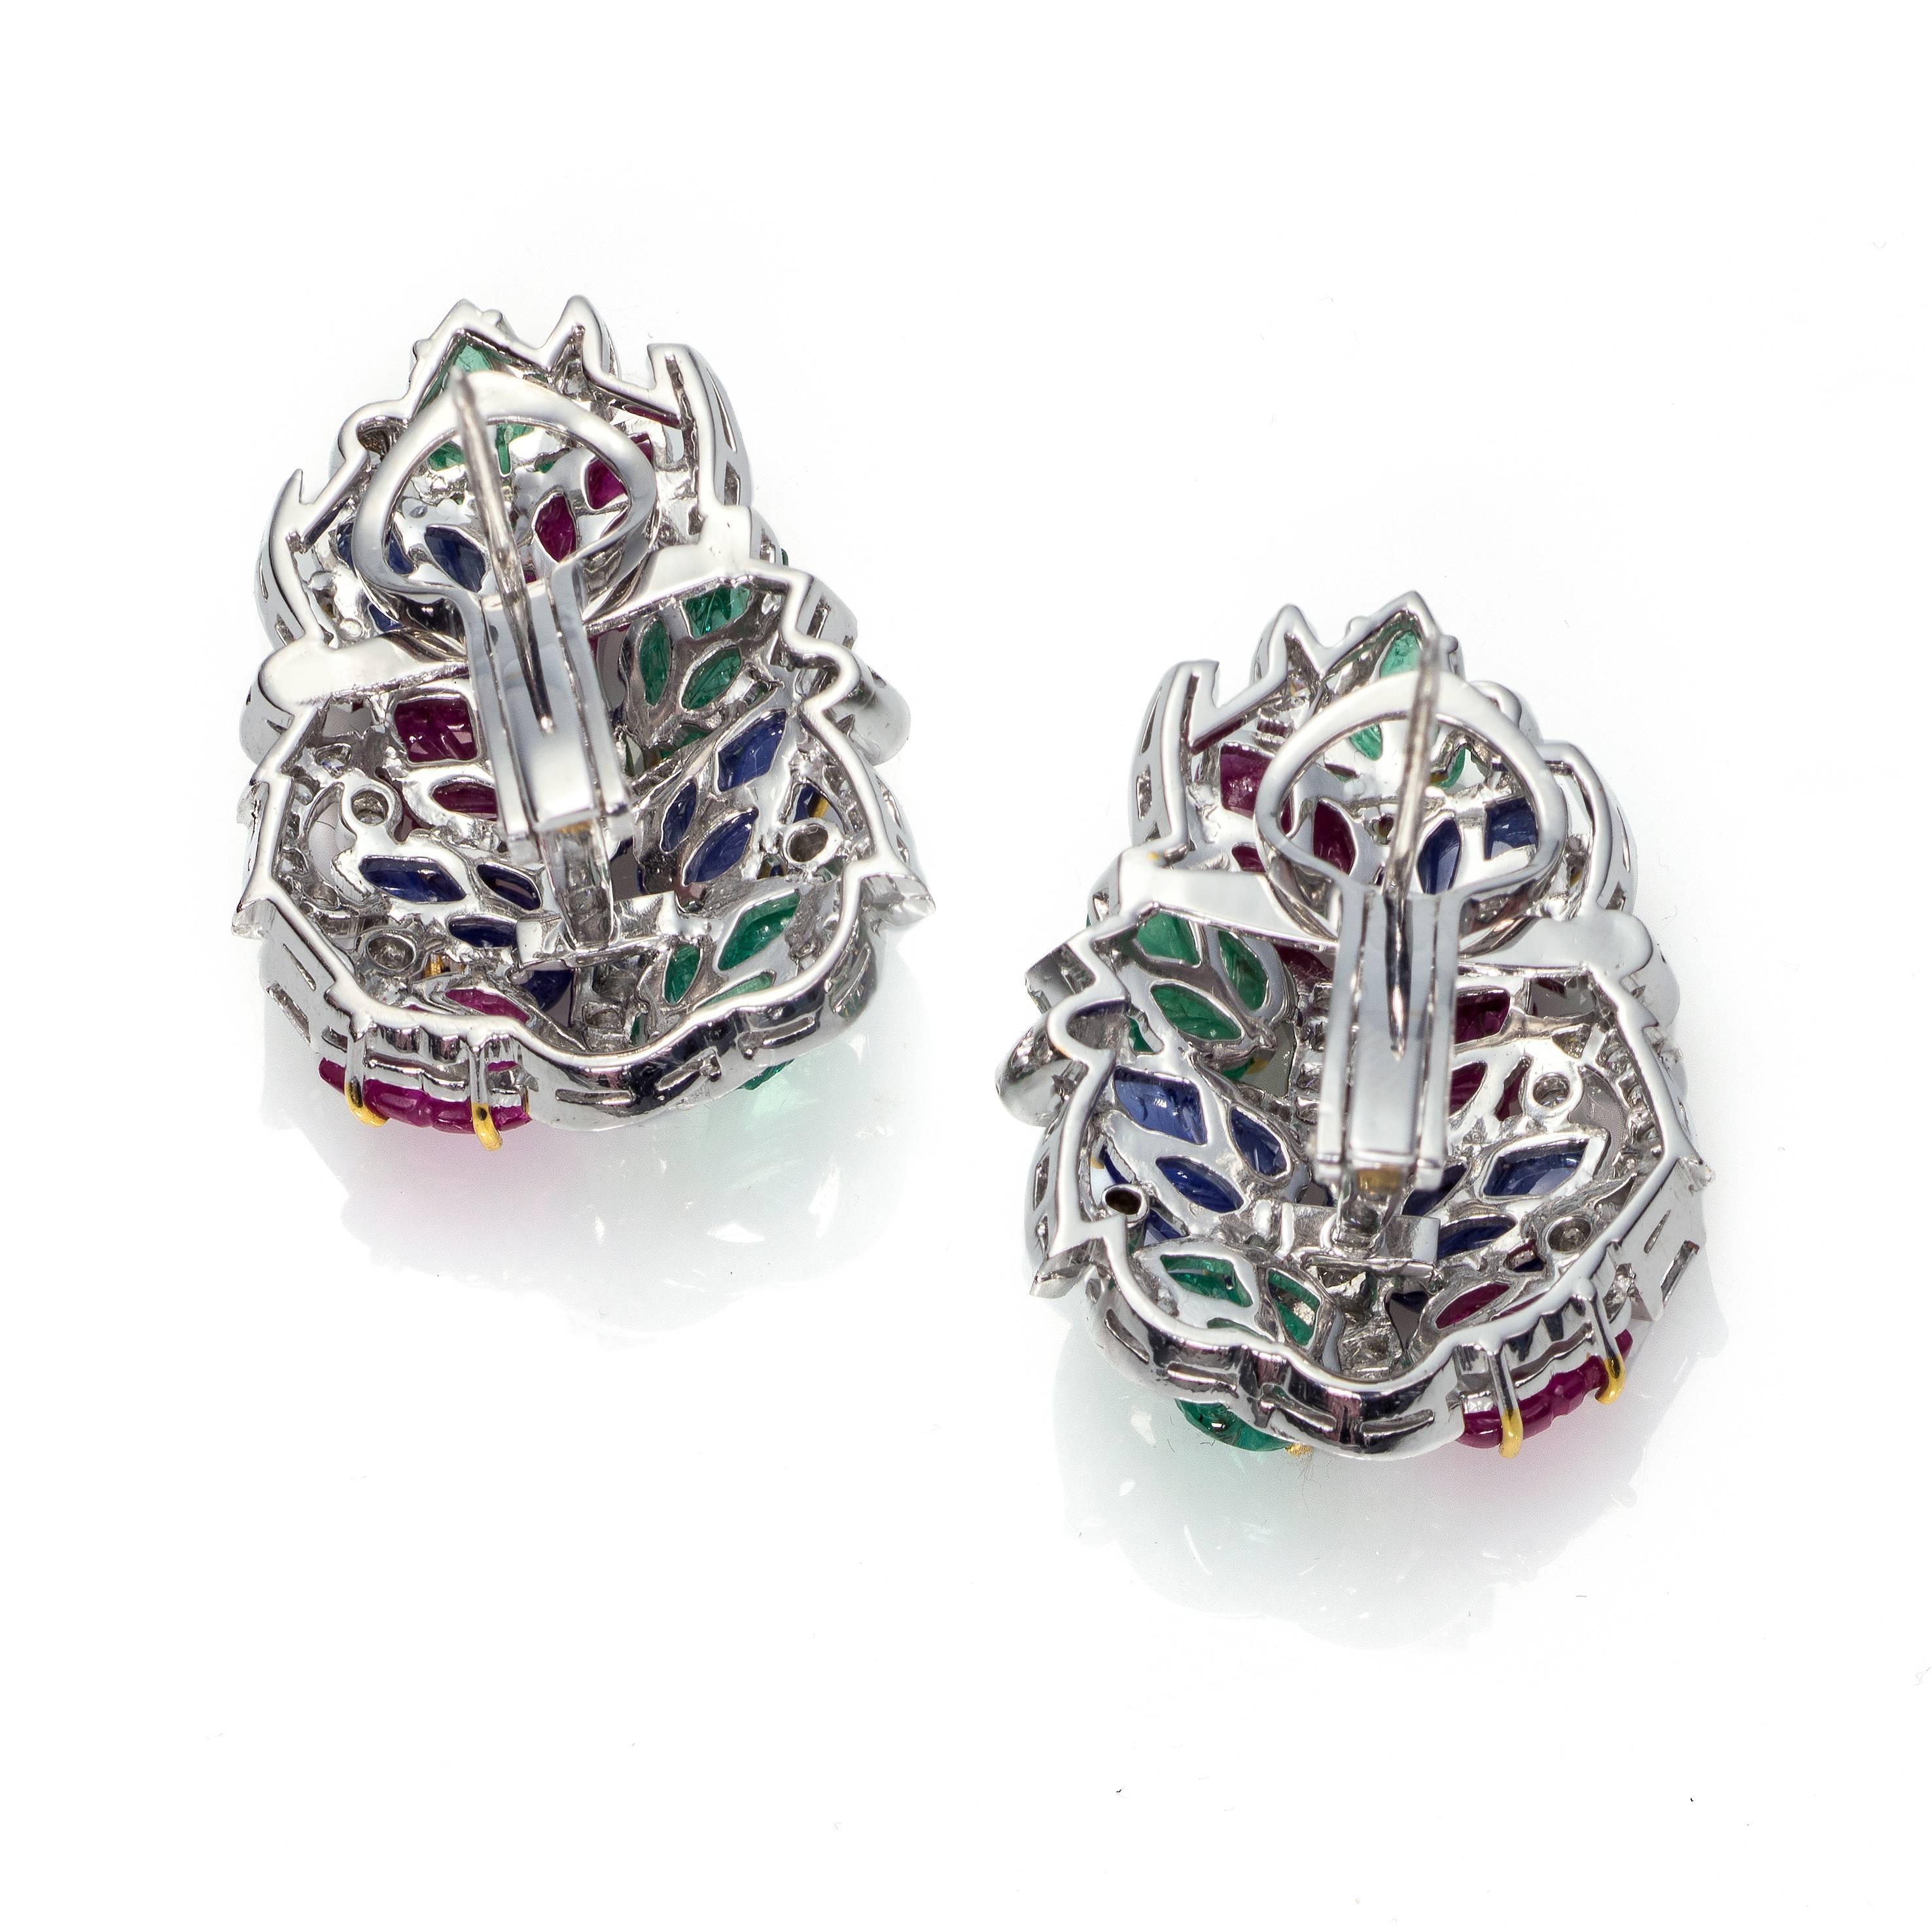 Made of White Gold 18 Kts. further set with carved Emeralds weighing 3´30 Carats, carved Rubies weighing 
4´50 Carats, carved Sapphires weighing 4´60 Carats and baguette diamonds and brillant cut-diamonds weighing 1´50 Carats
